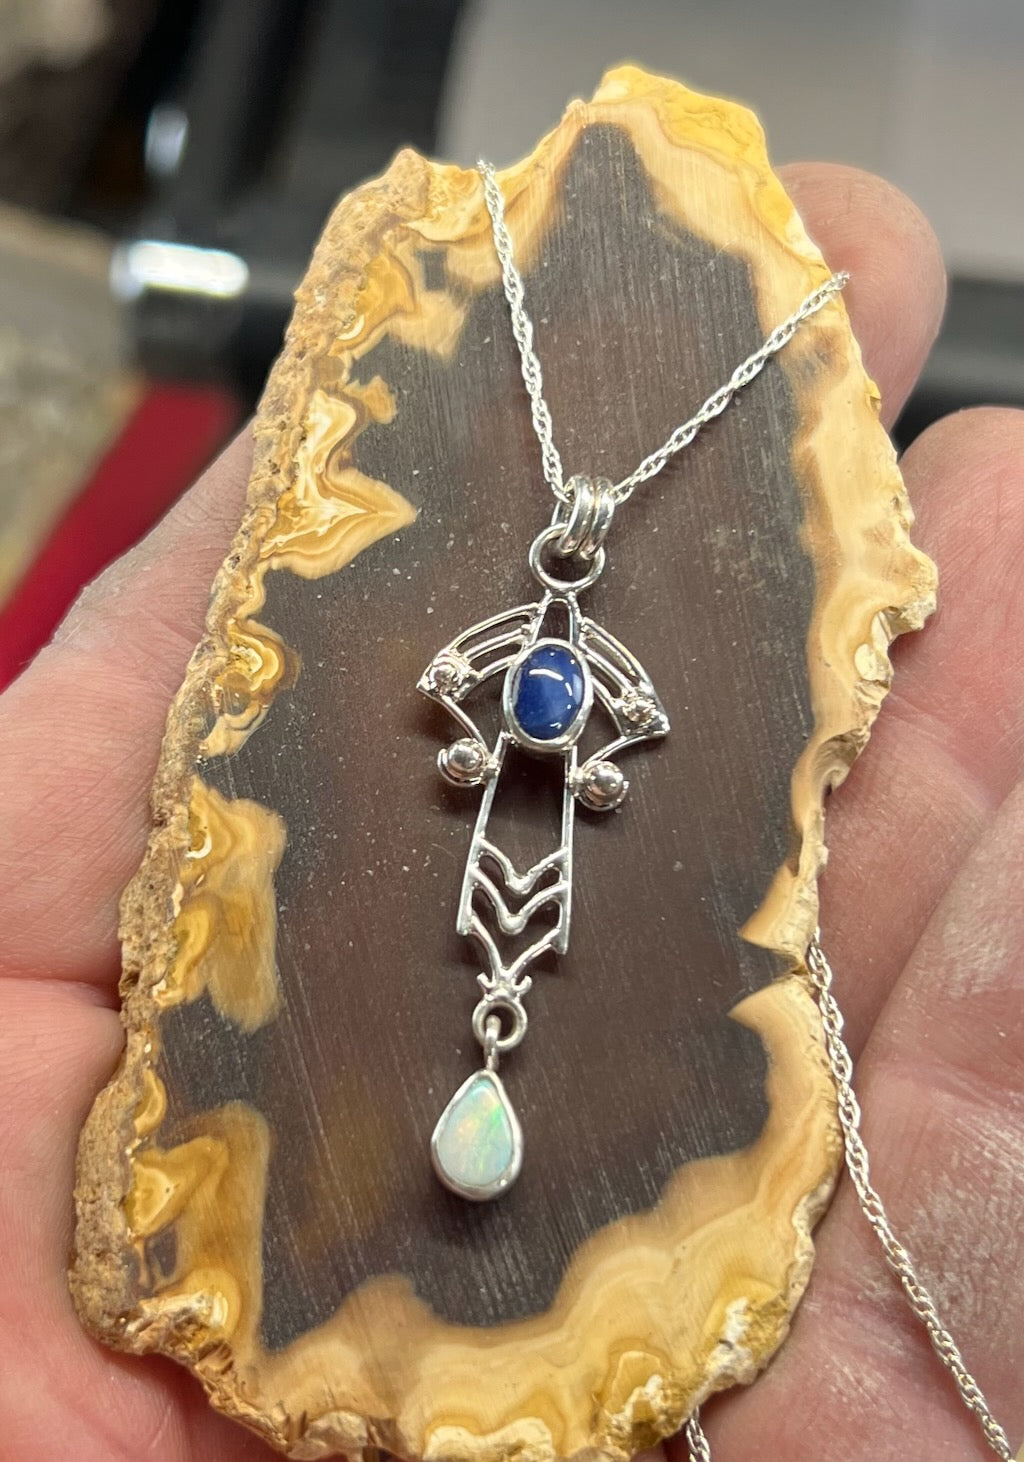 Star Sapphire and Opal Pendant